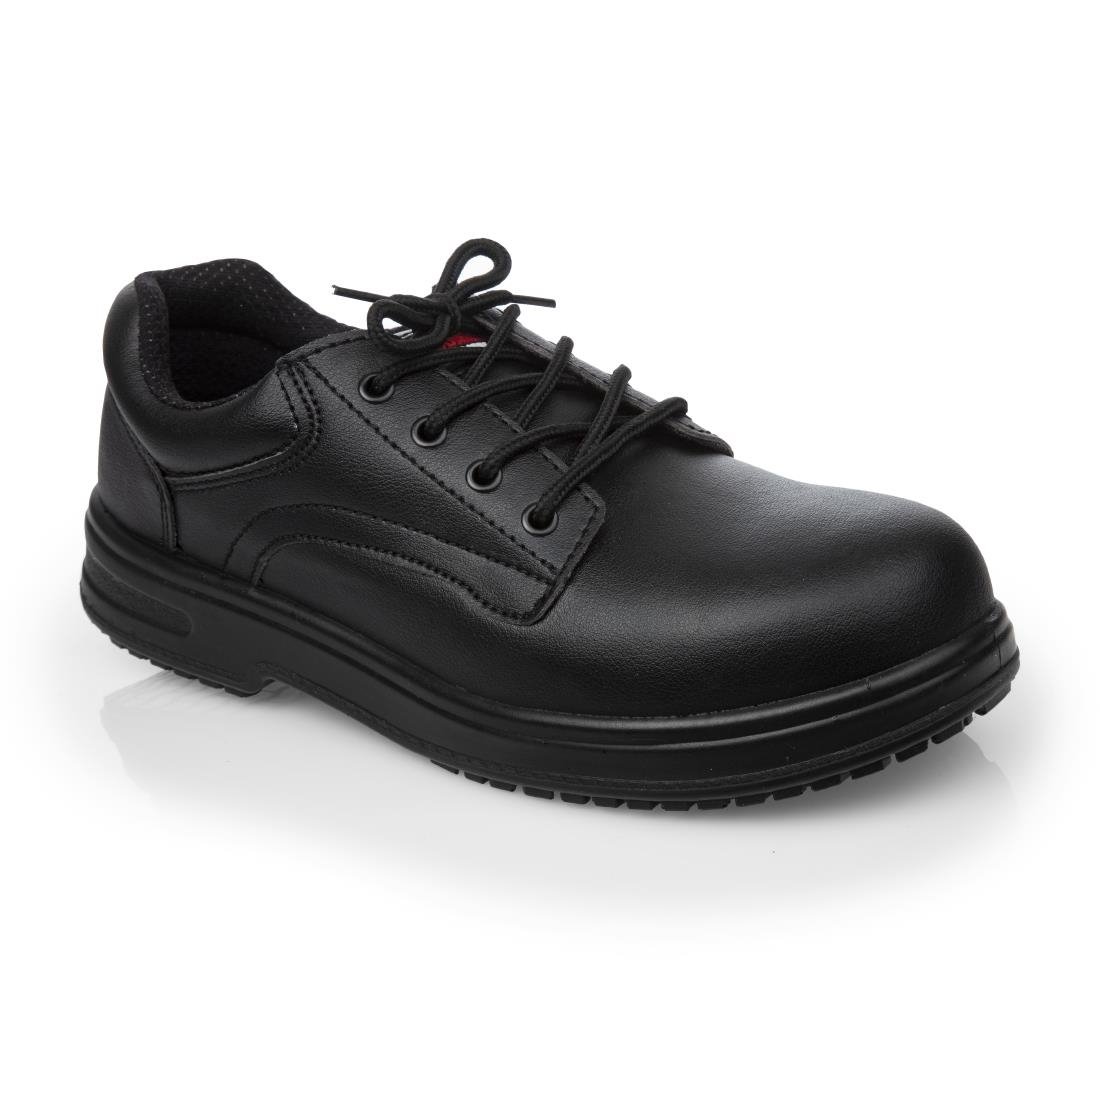 BB497-46 Slipbuster Basic Toe Cap Safety Shoes Black 46 JD Catering Equipment Solutions Ltd